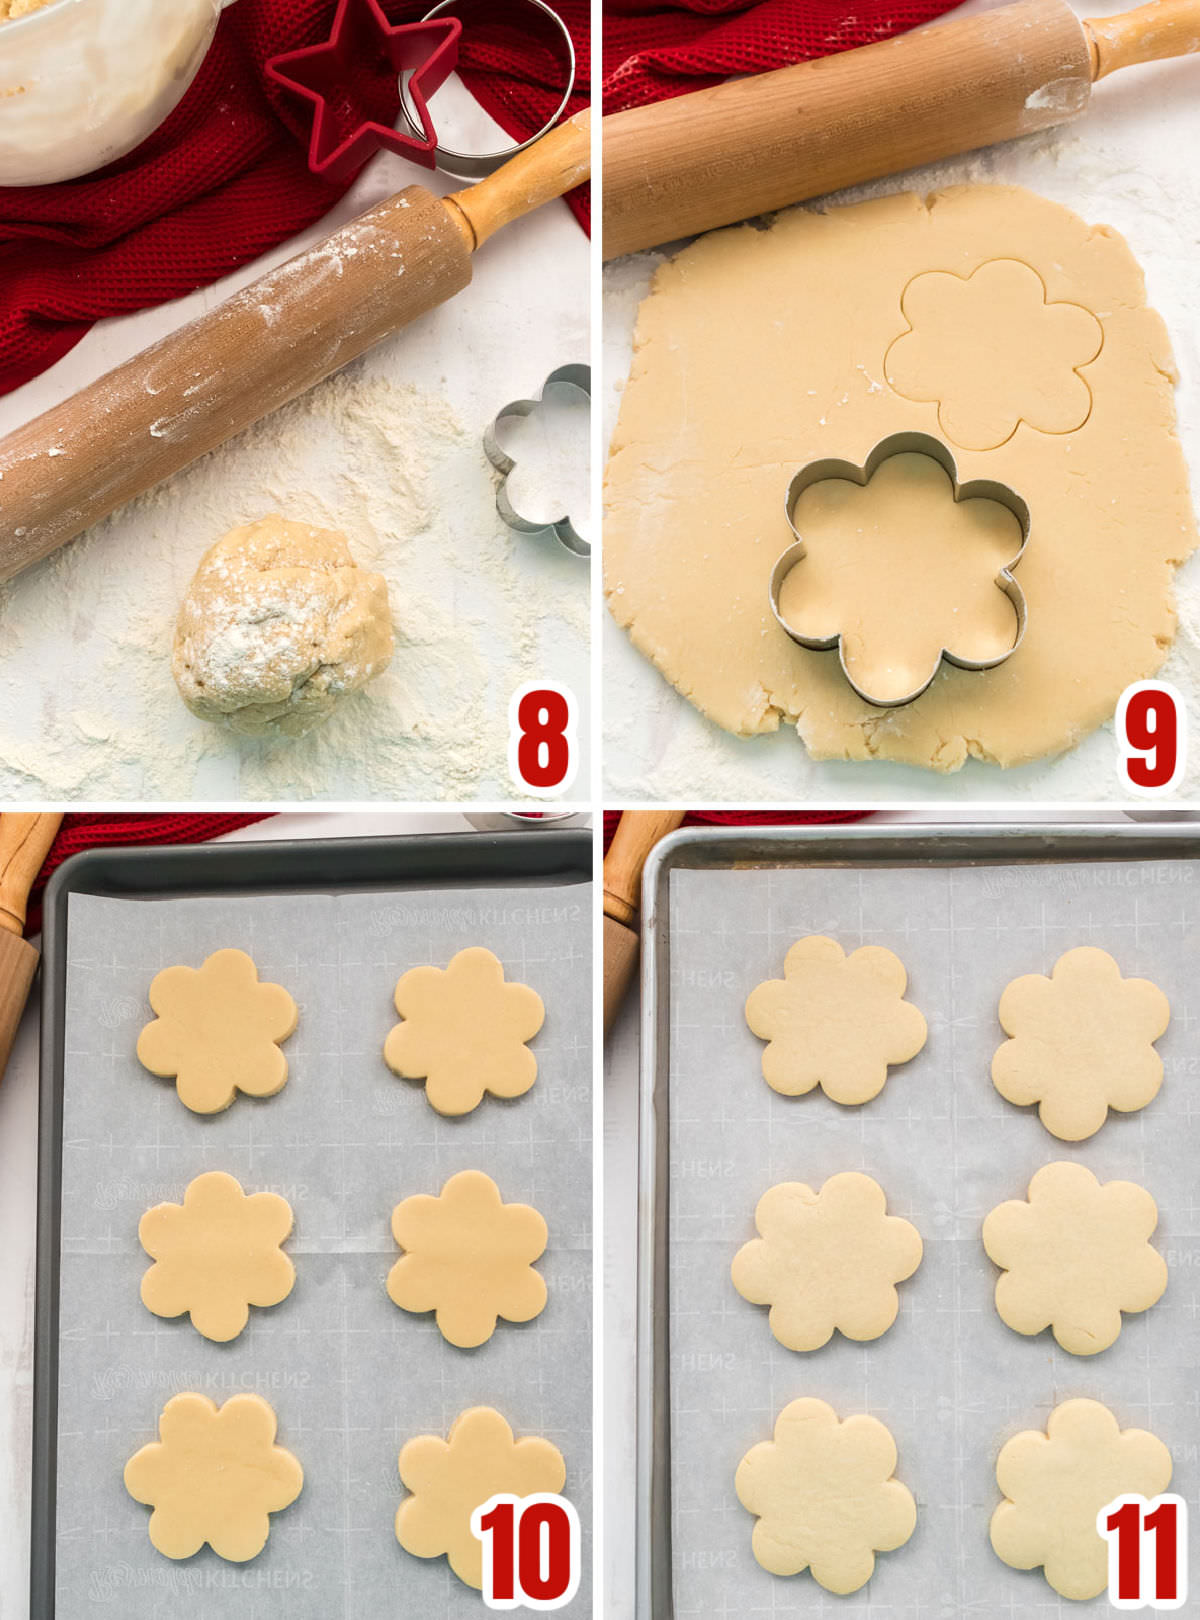 Collage image showing the steps for baking The Best Sugar Cookie Recipe.